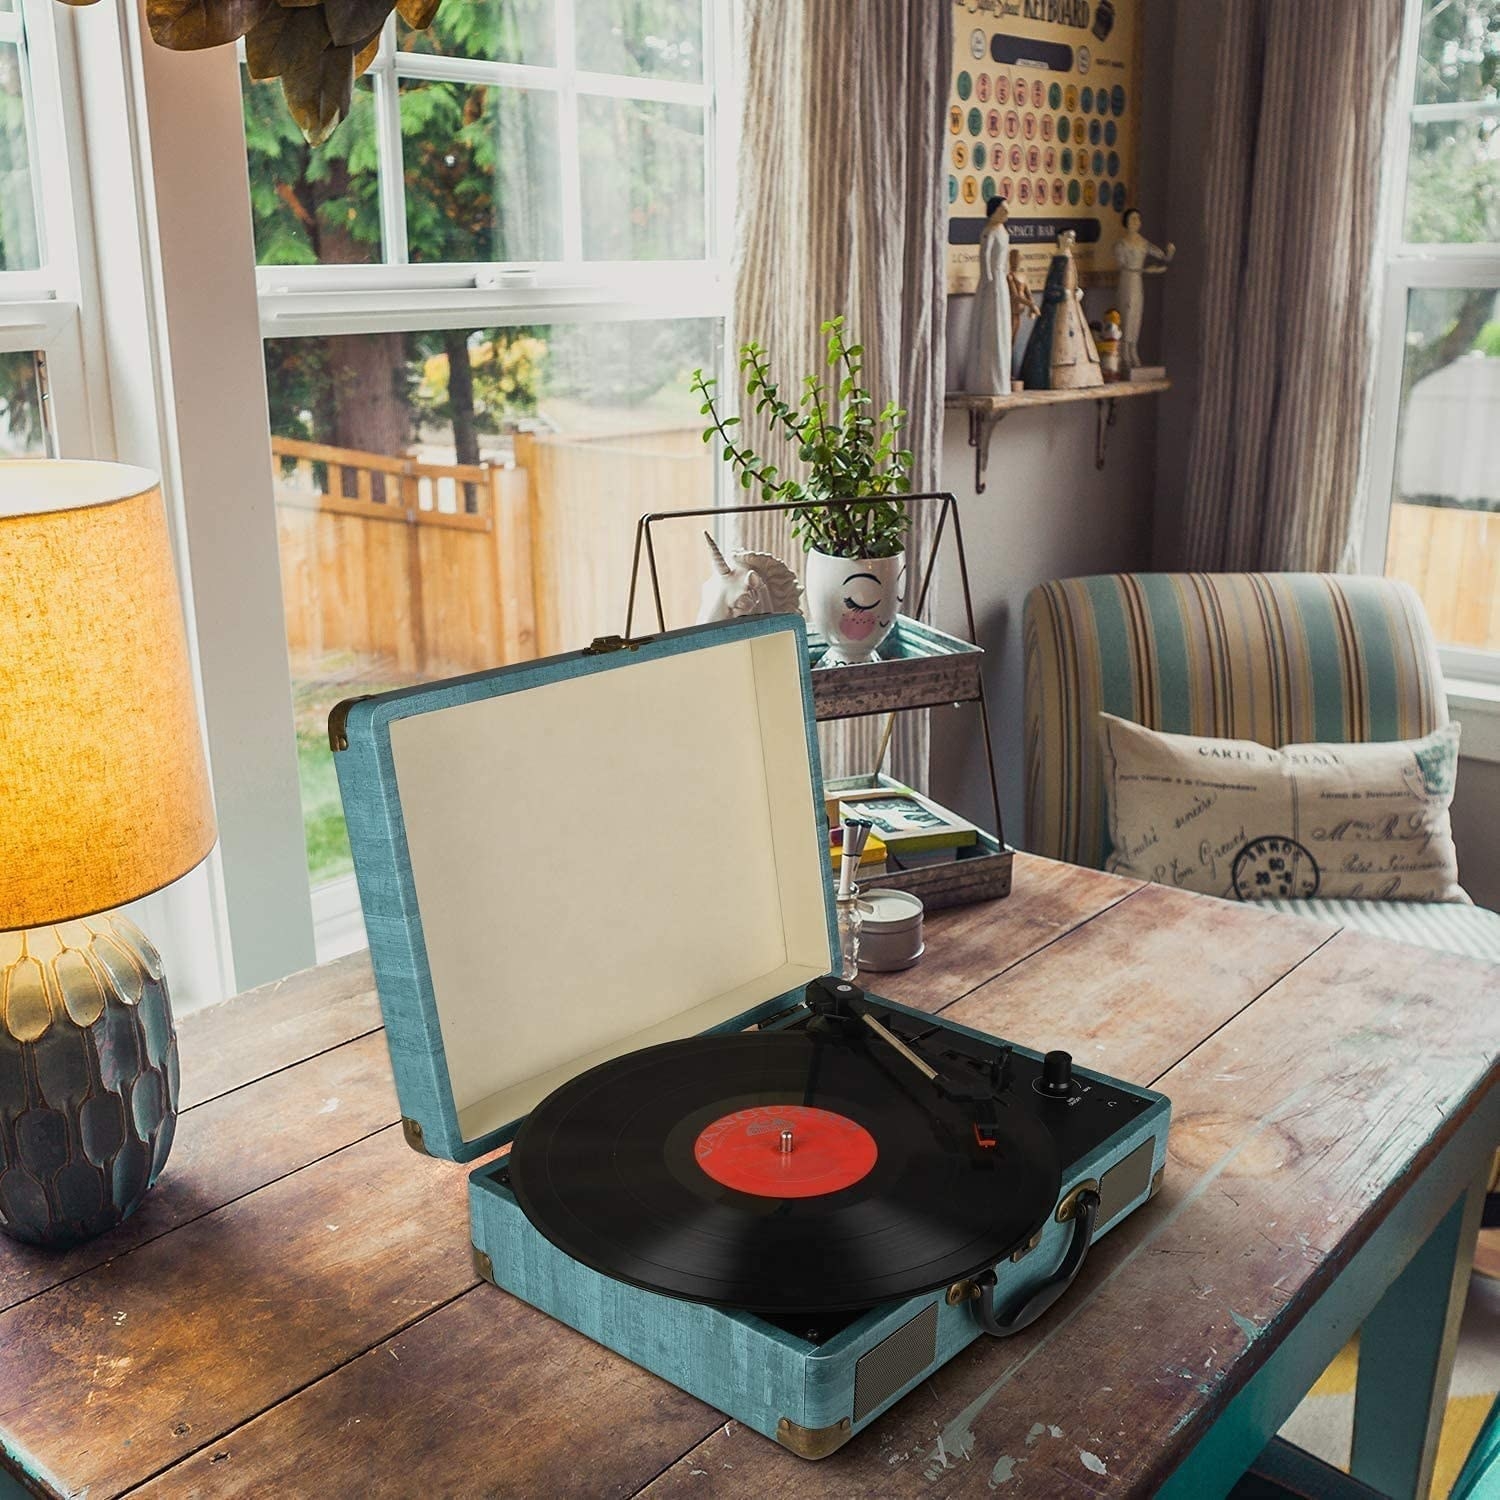 the record player on a table